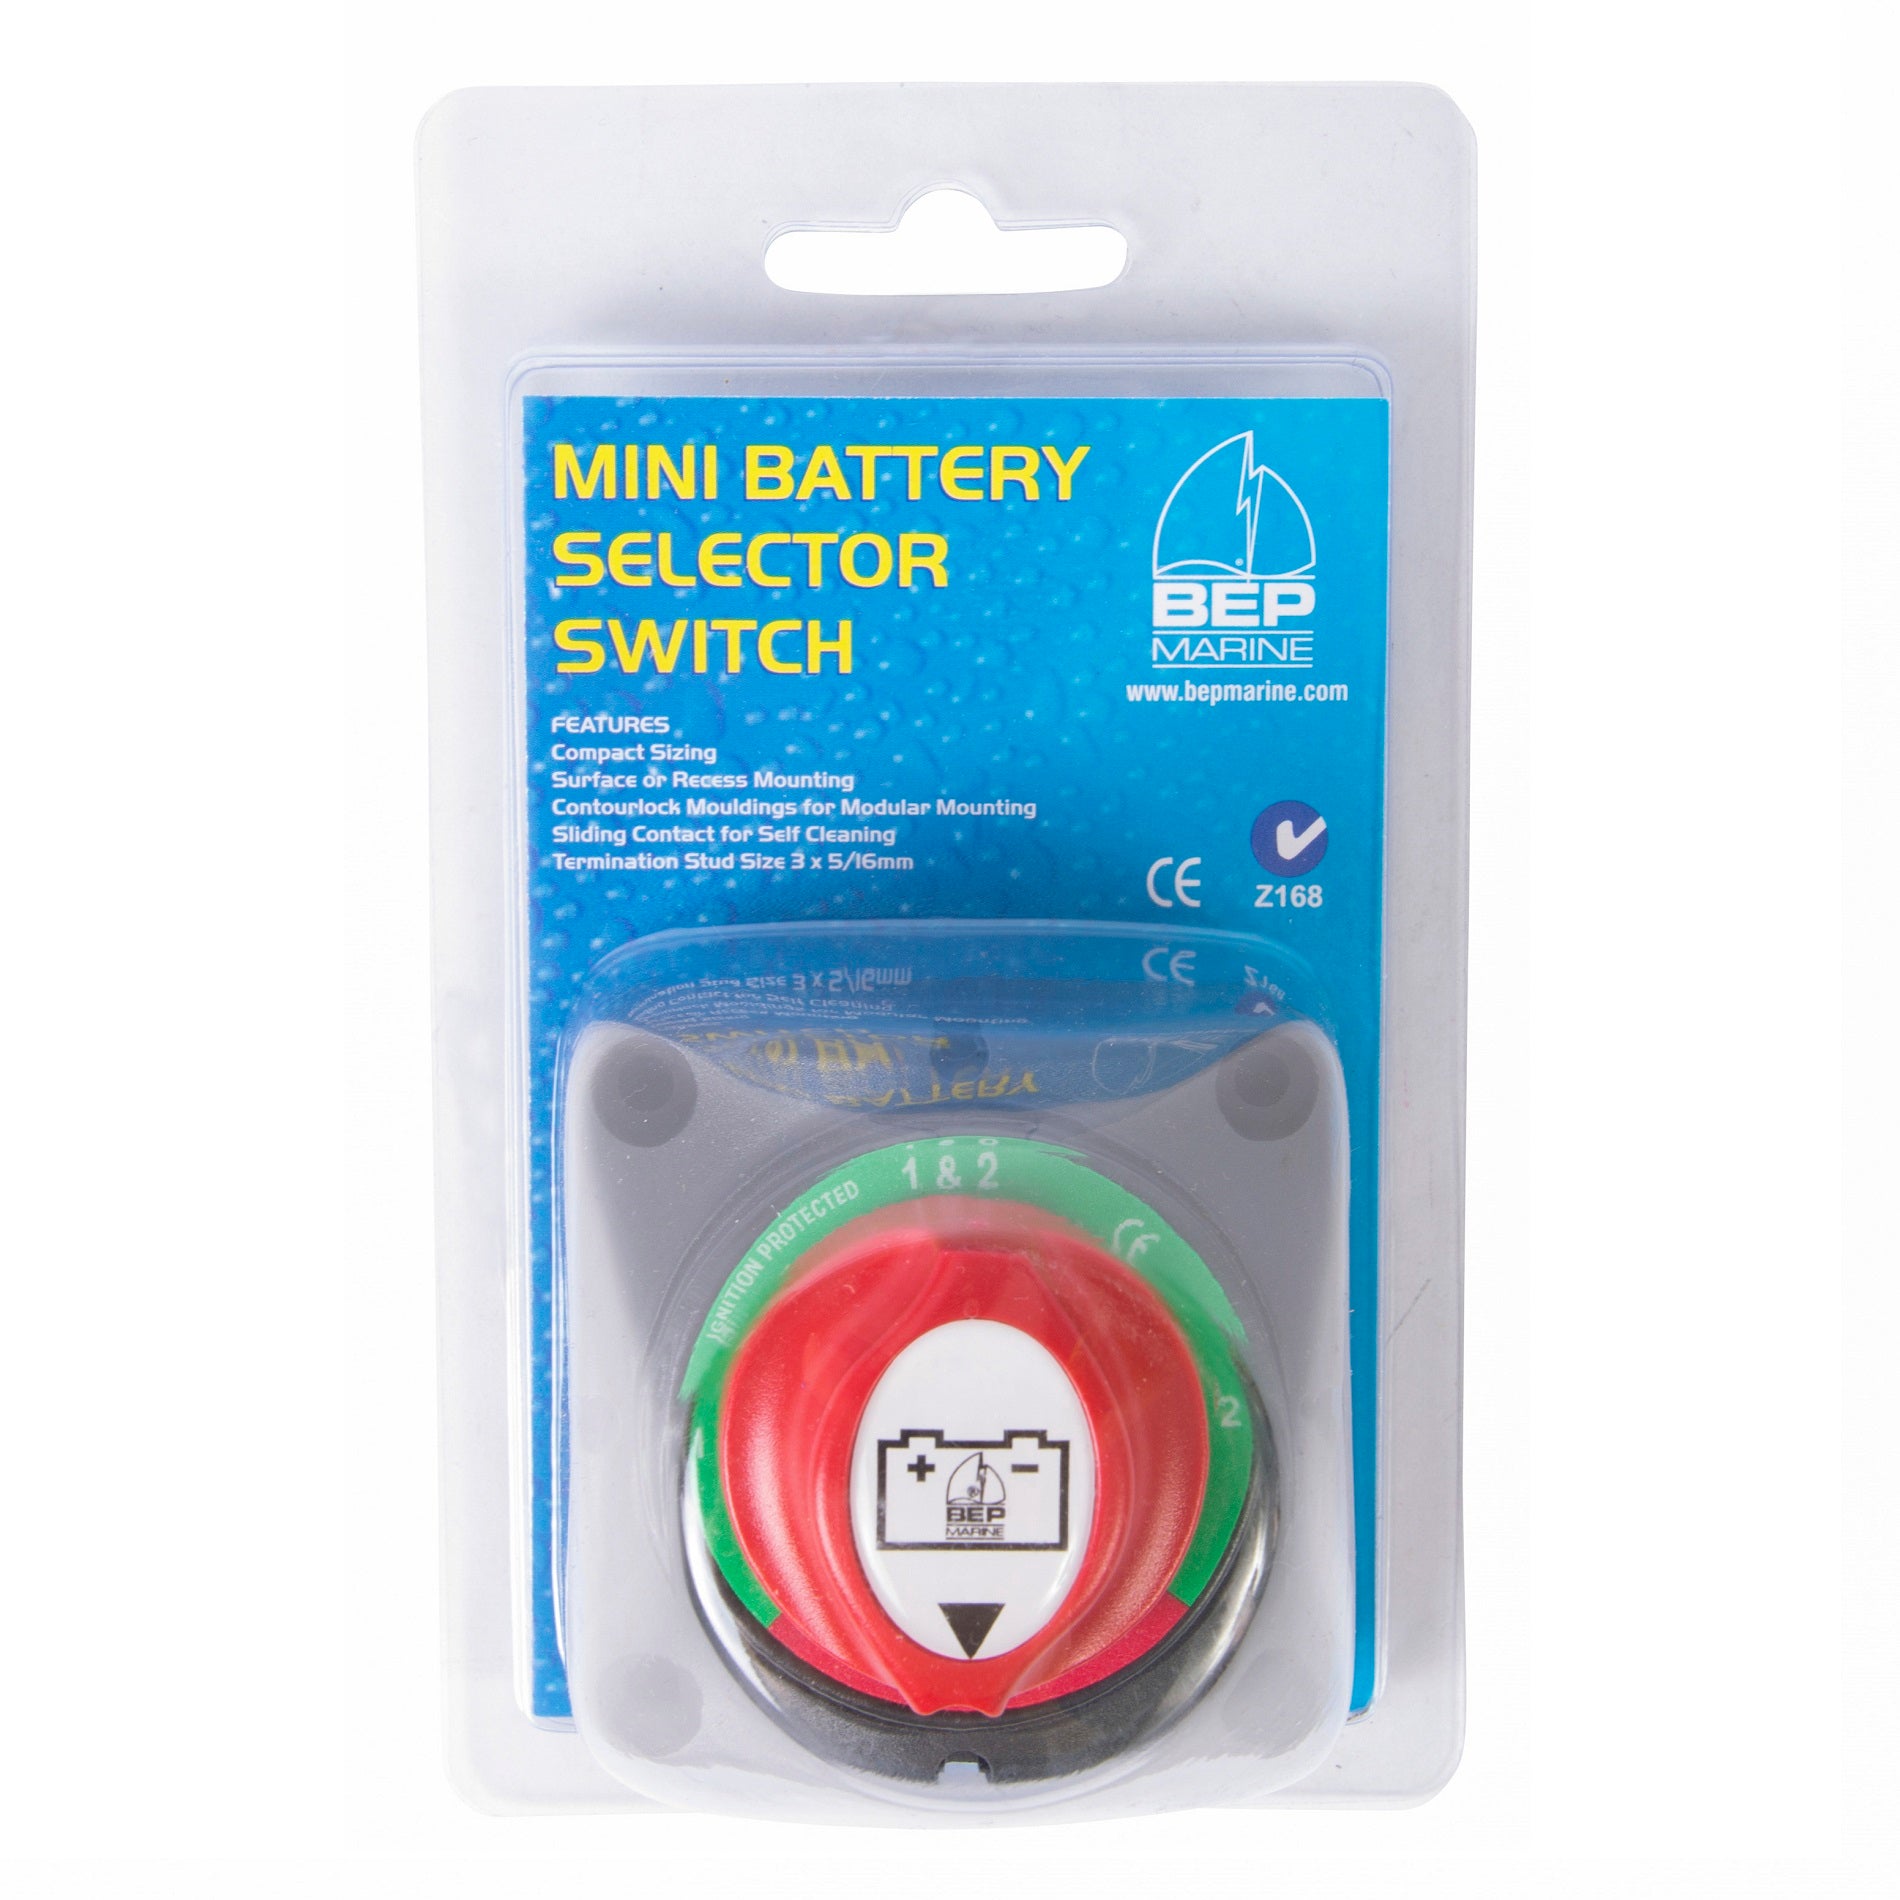 Mini Battery Selector Switch 701S